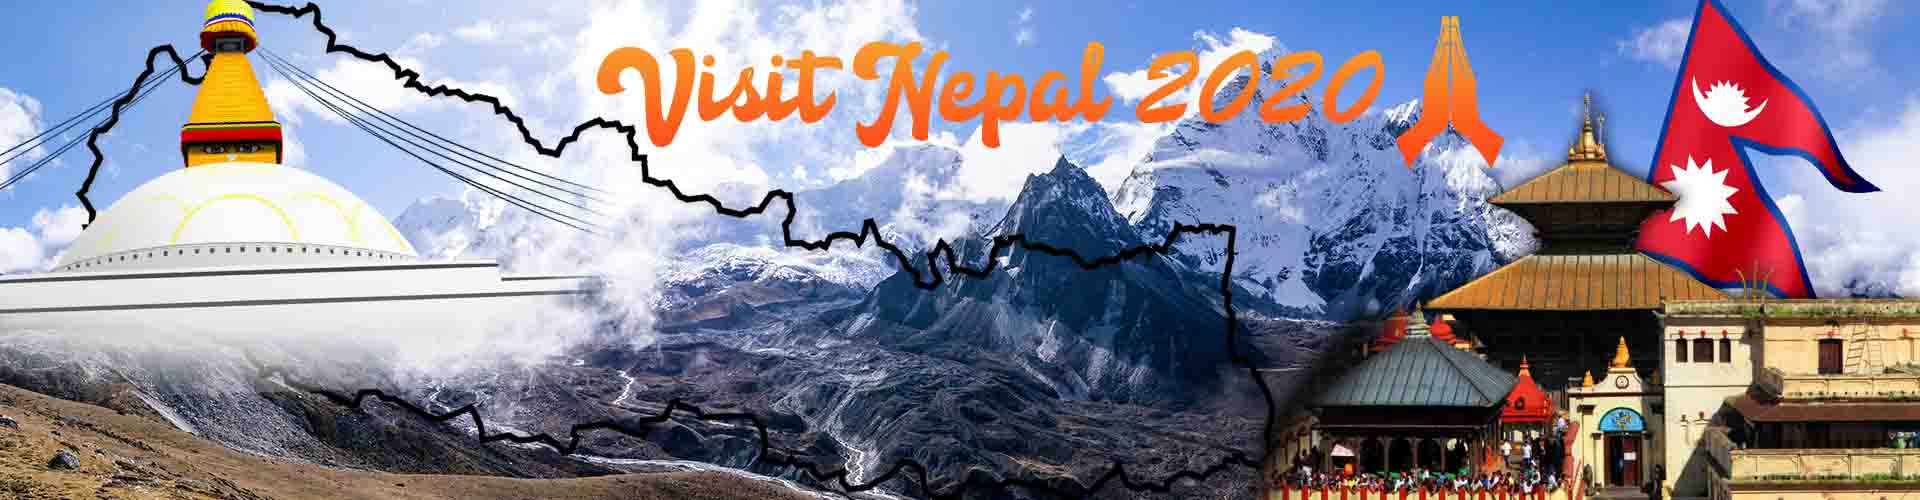 Visit Nepal 2020 | Gifts from Nepal in visit nepal 2020 | What to buy in nepal